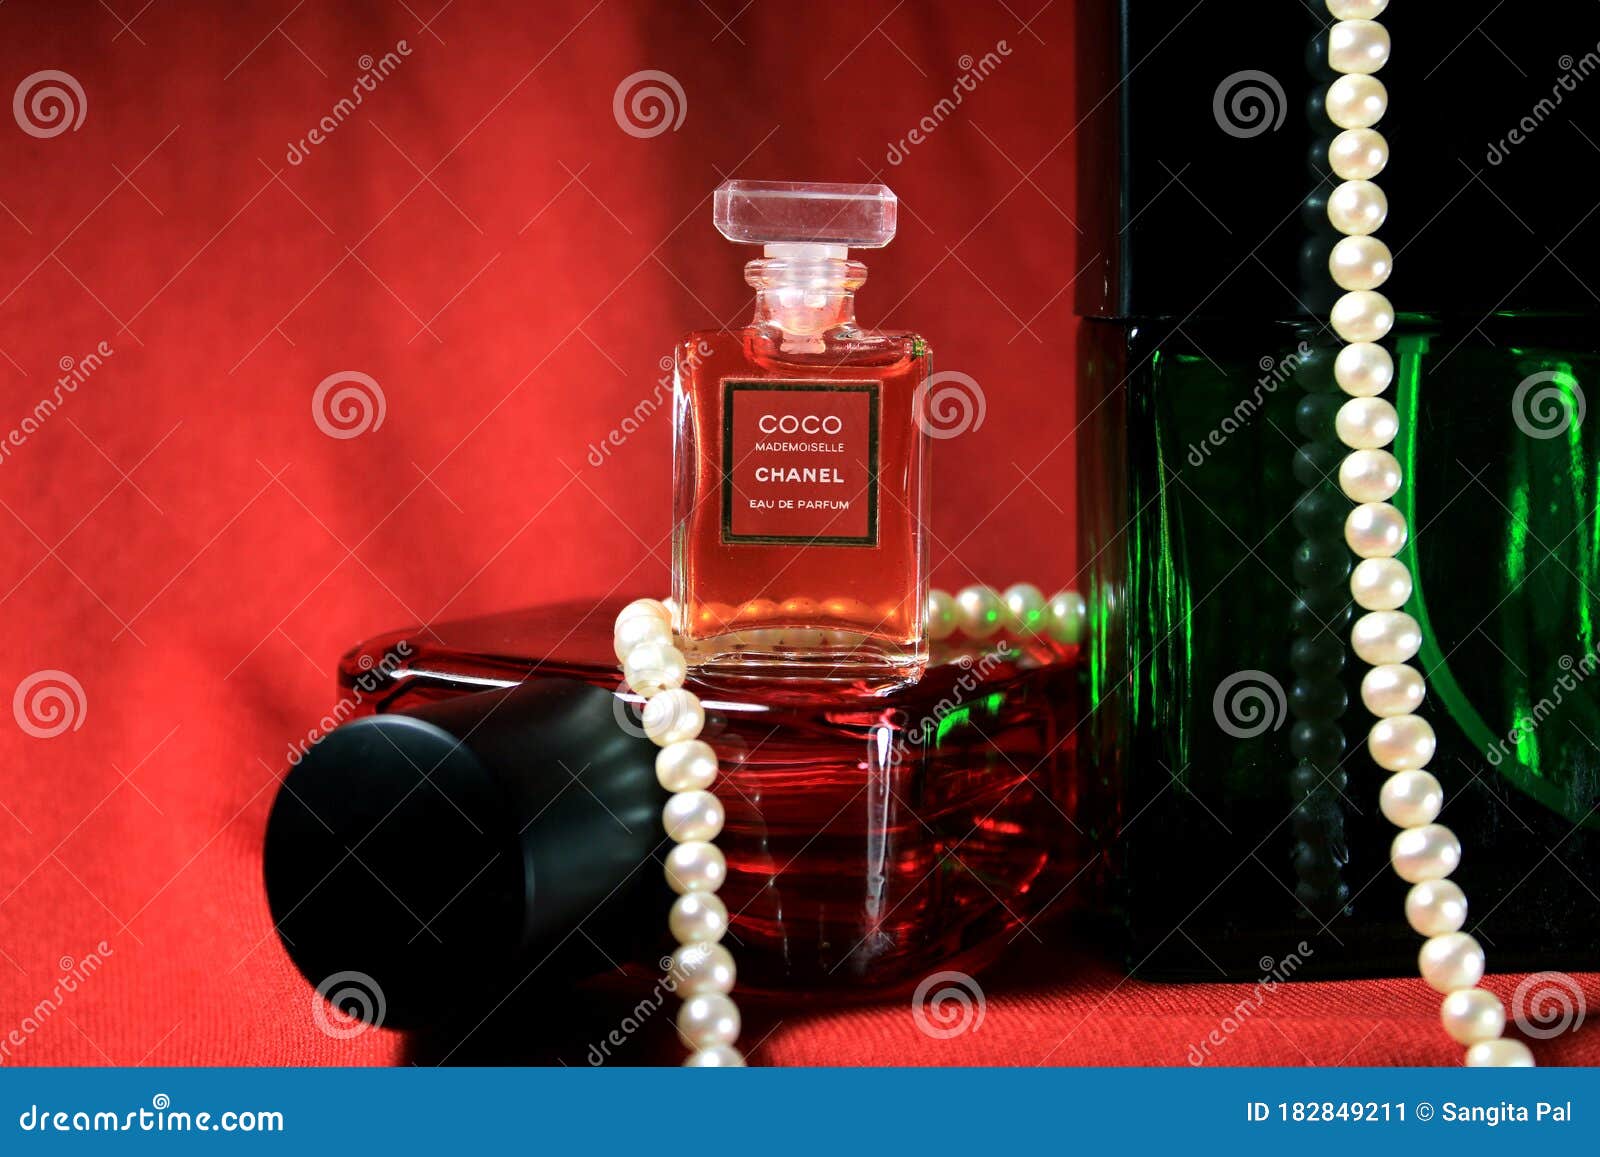 Chanel Perfume Bottles Isolated on Red Background. Bottle with Coco Chanel  & N`5 Chanel Perfume Product. Editorial Photo - Image of france, bracelet:  182849211